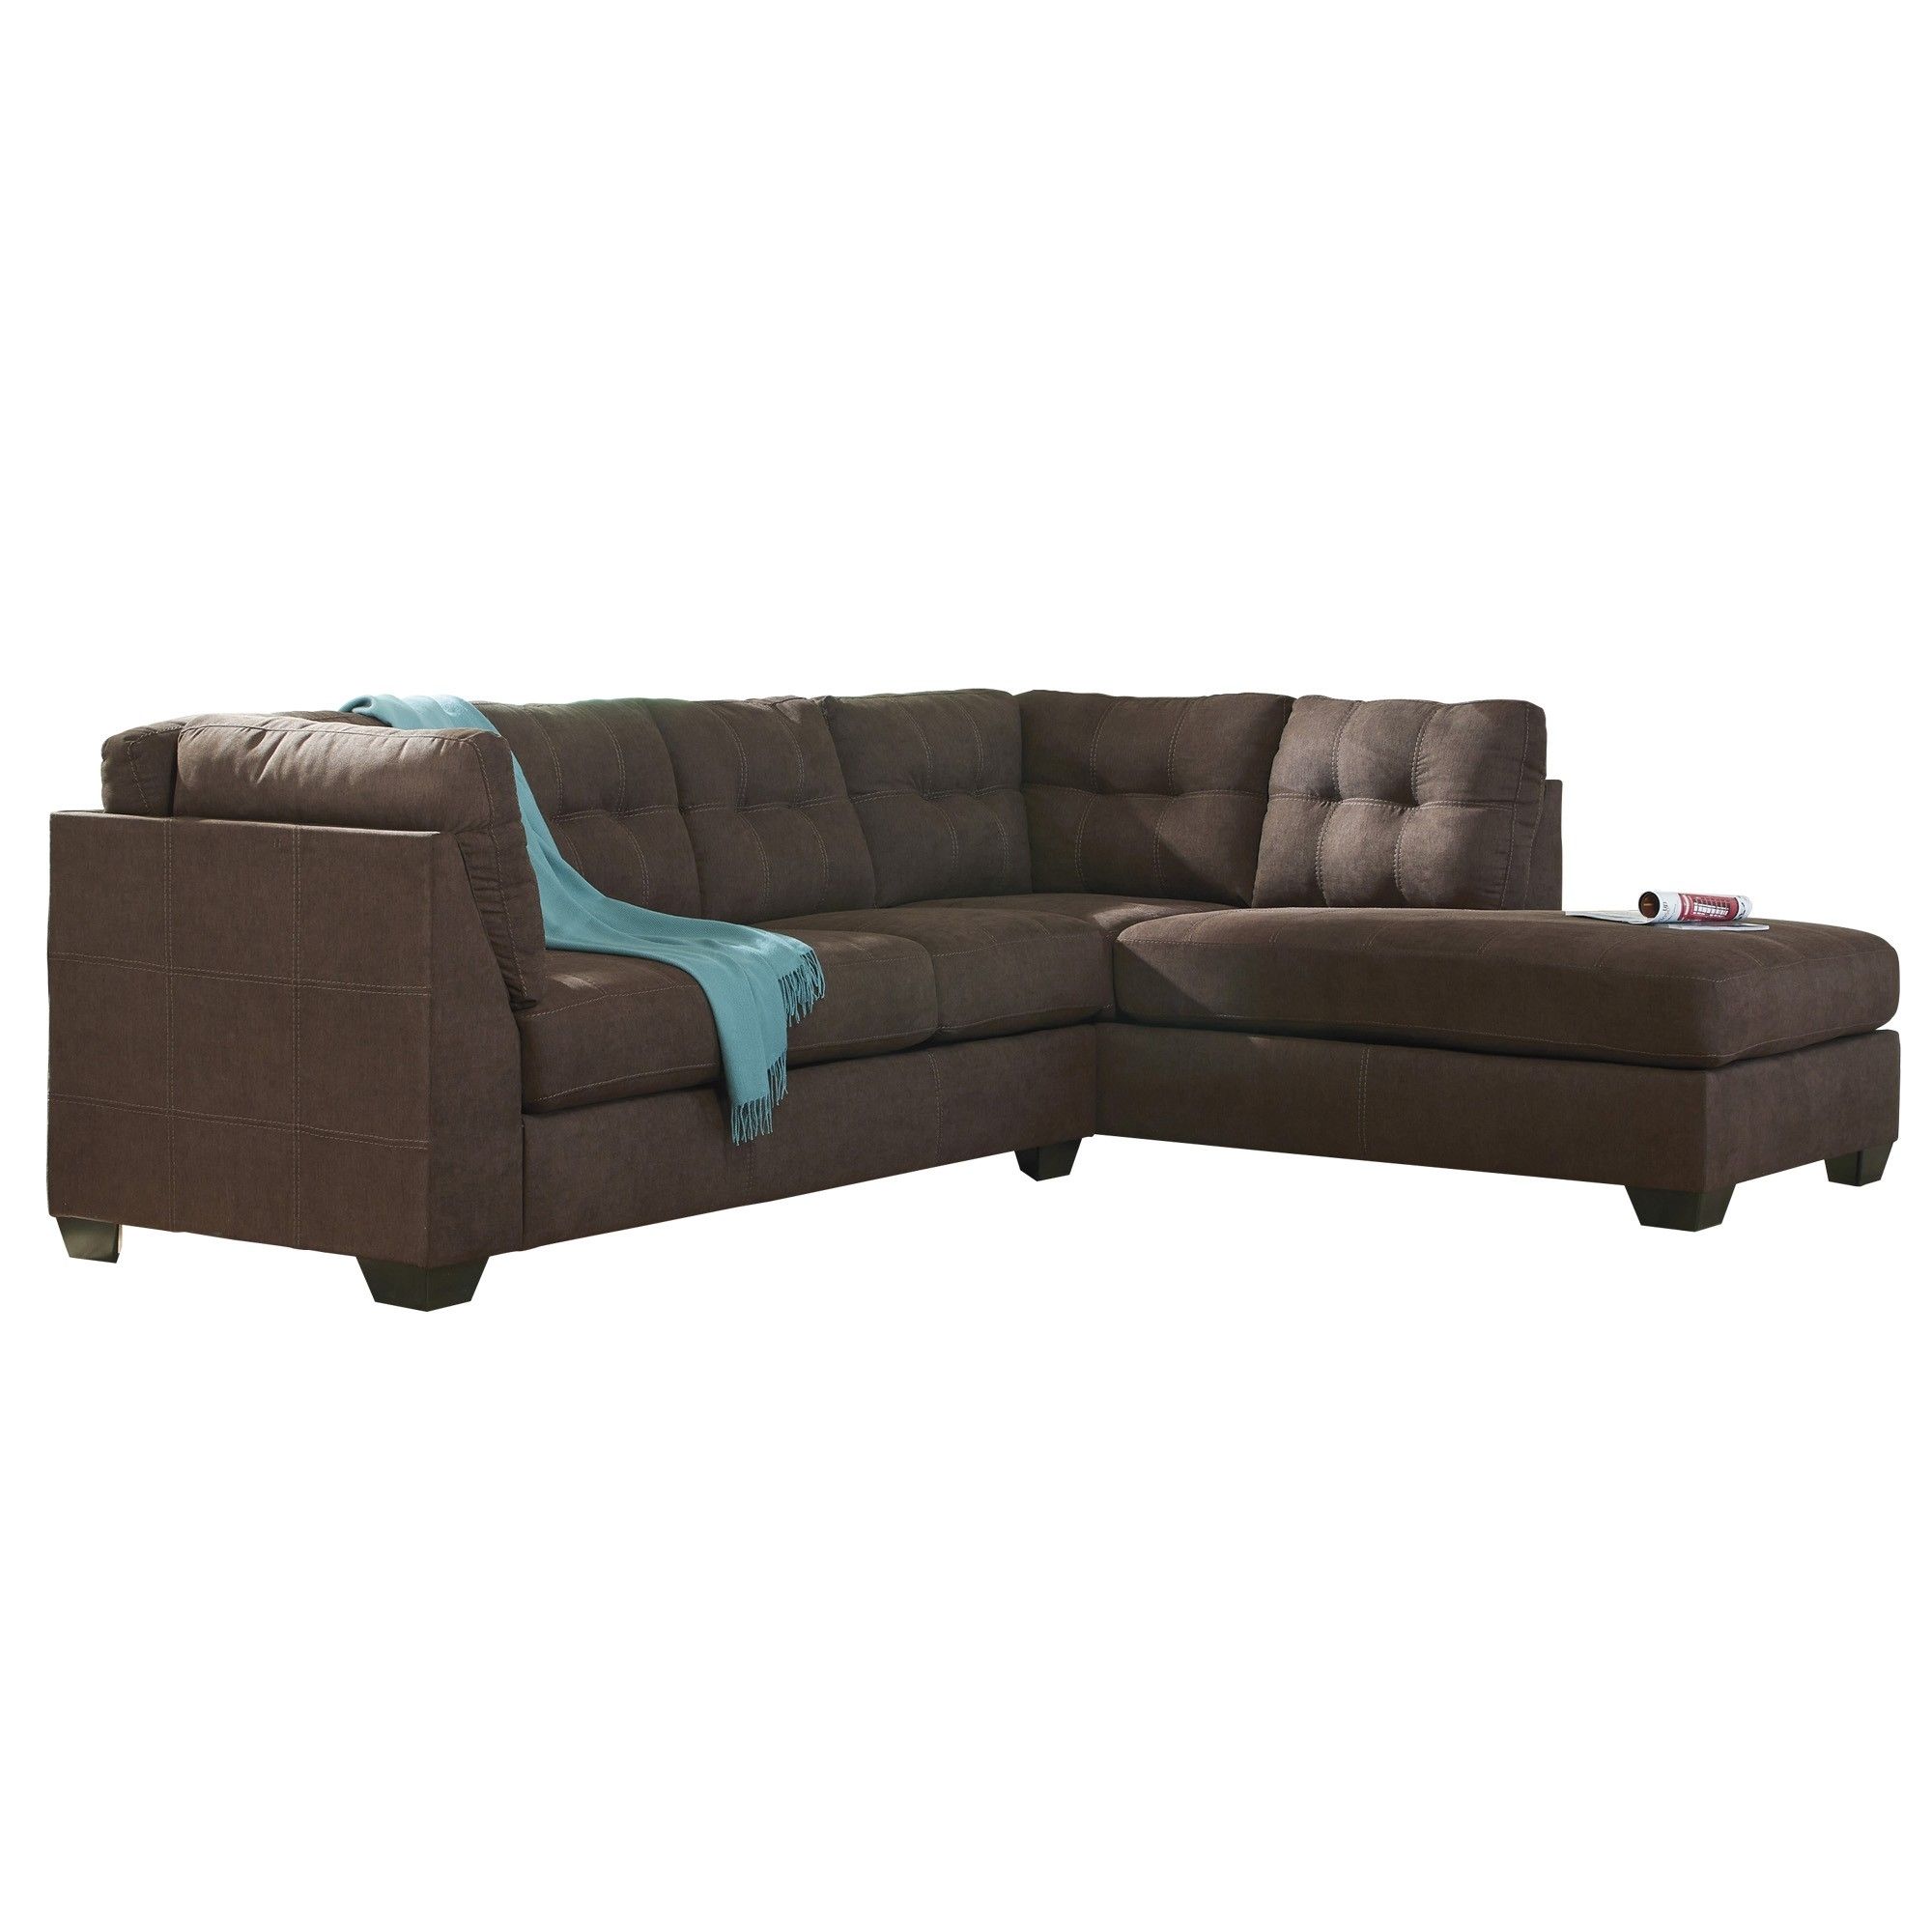 Sectionals | Tepperman's Inside Teppermans Sectional Sofas (View 8 of 10)